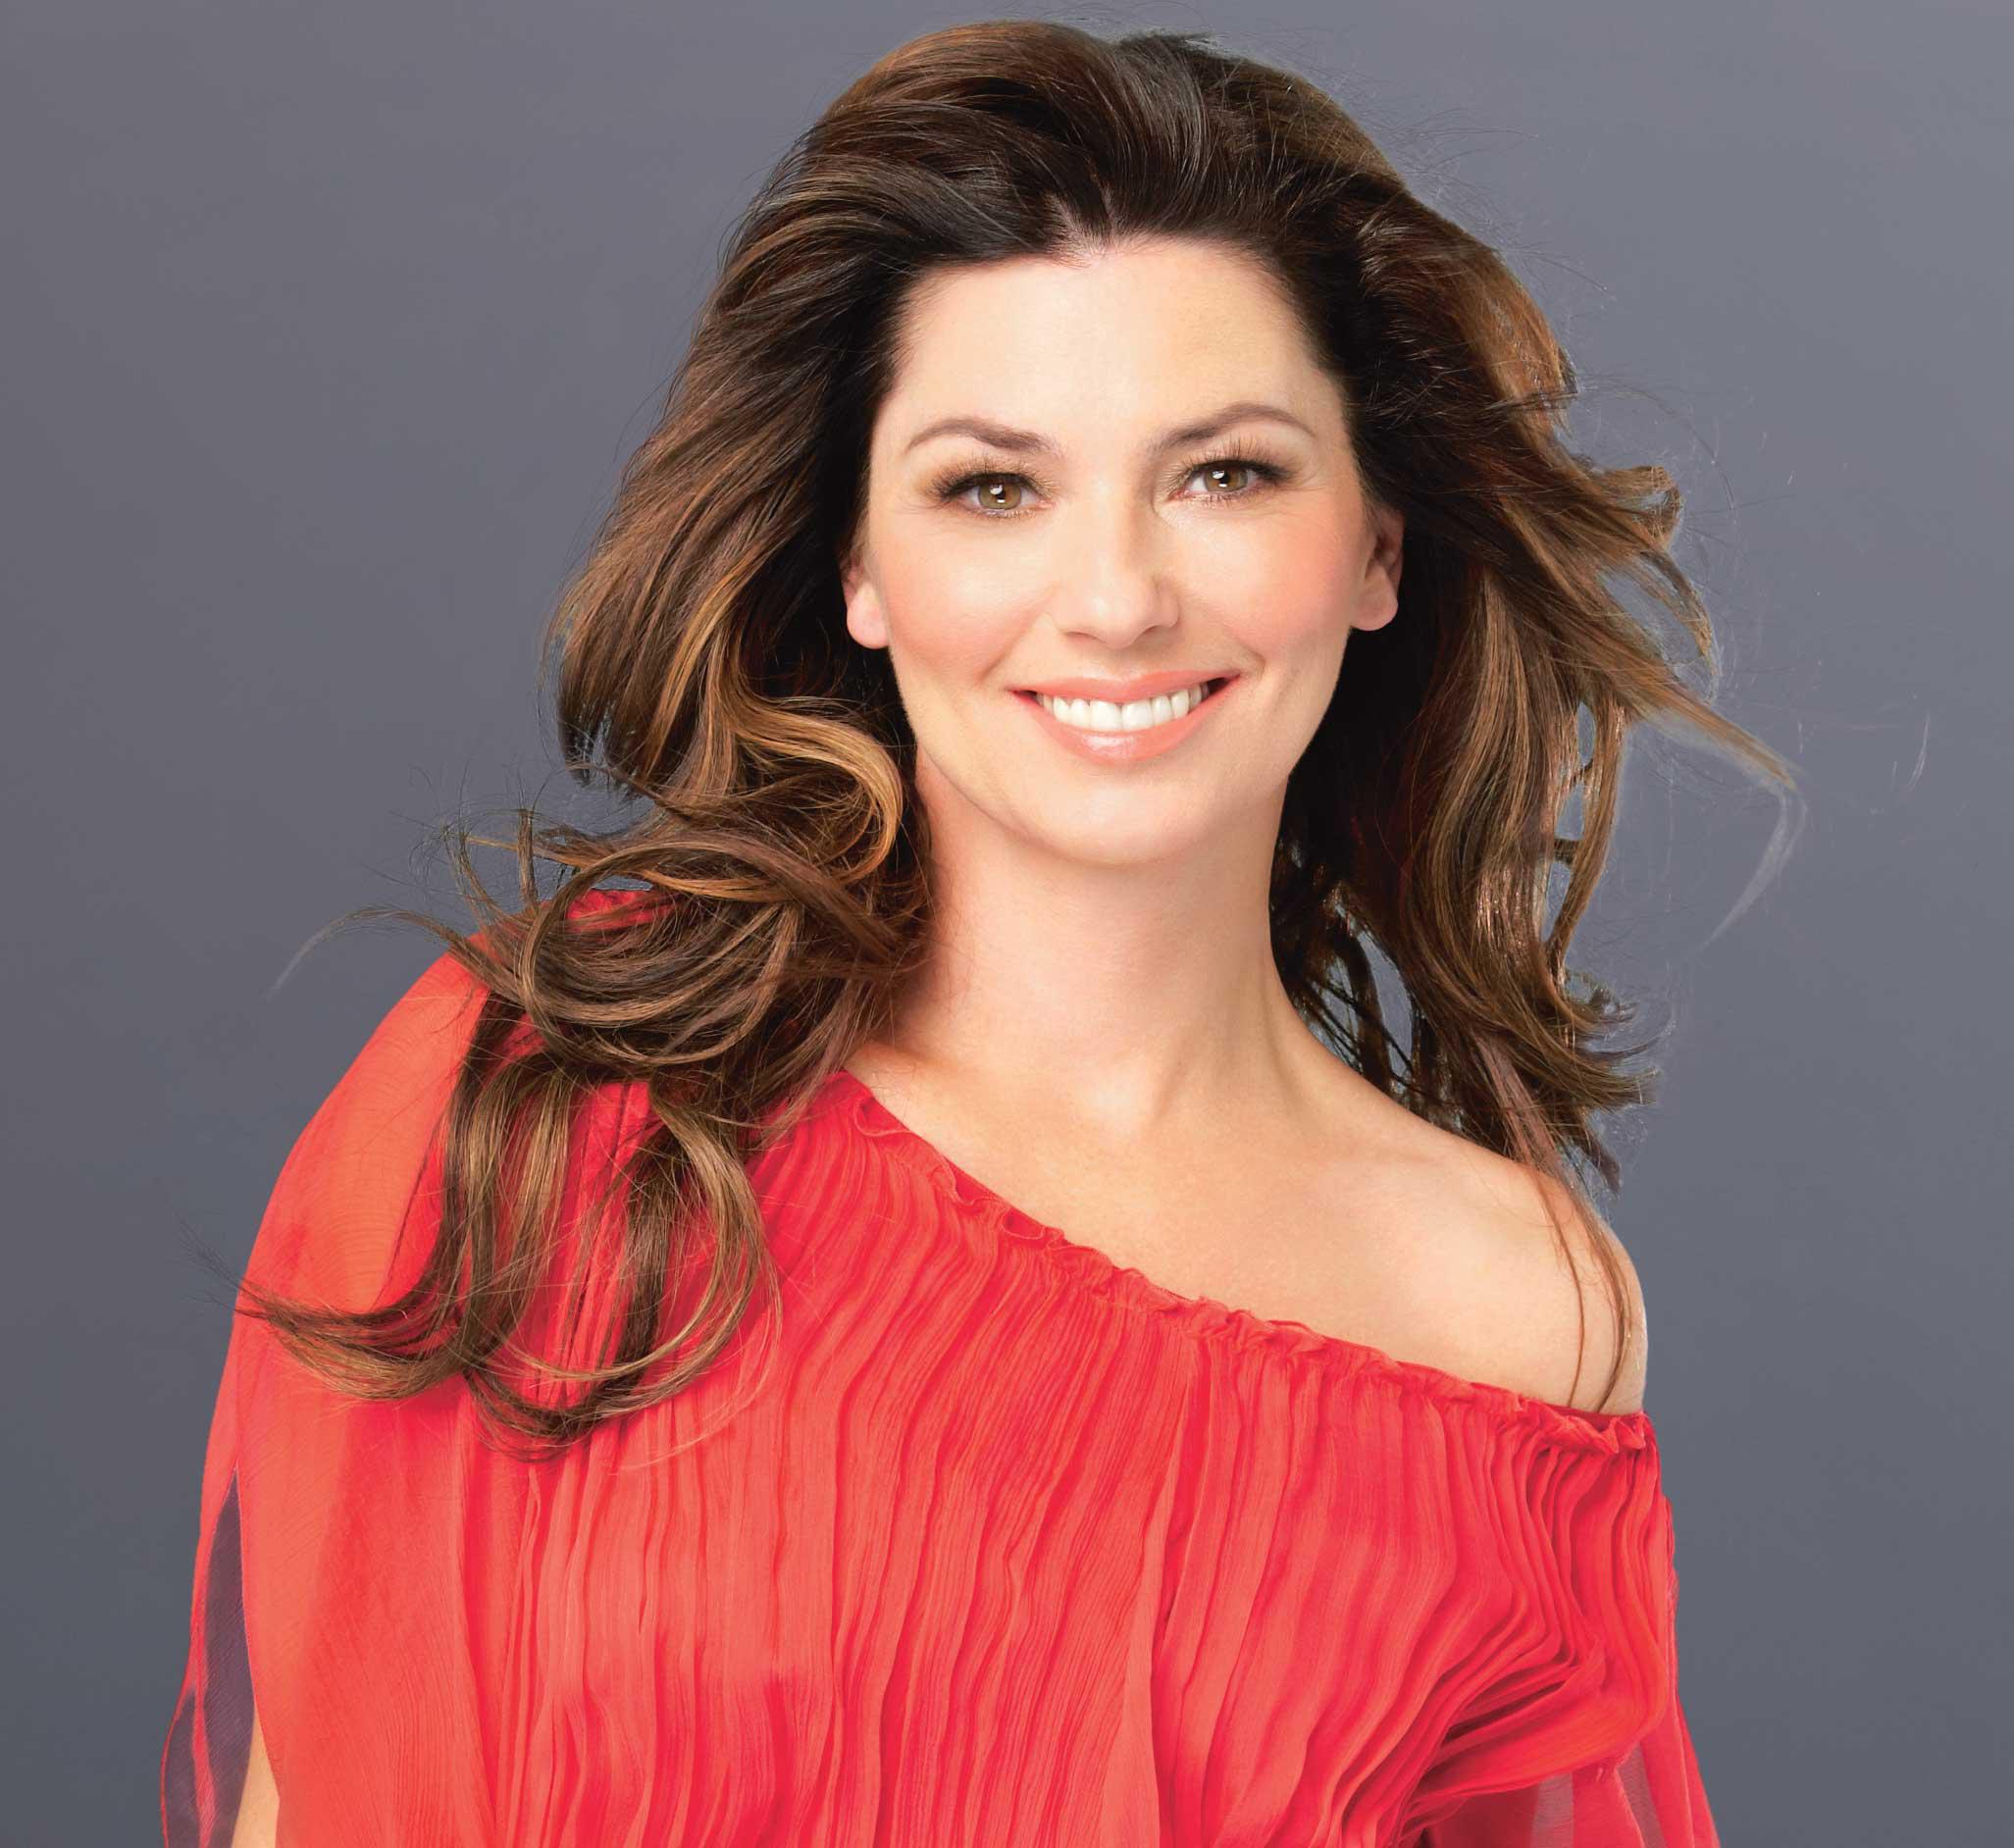 Shania Twain: Chatelaine's interview with the singer turned reality TV star